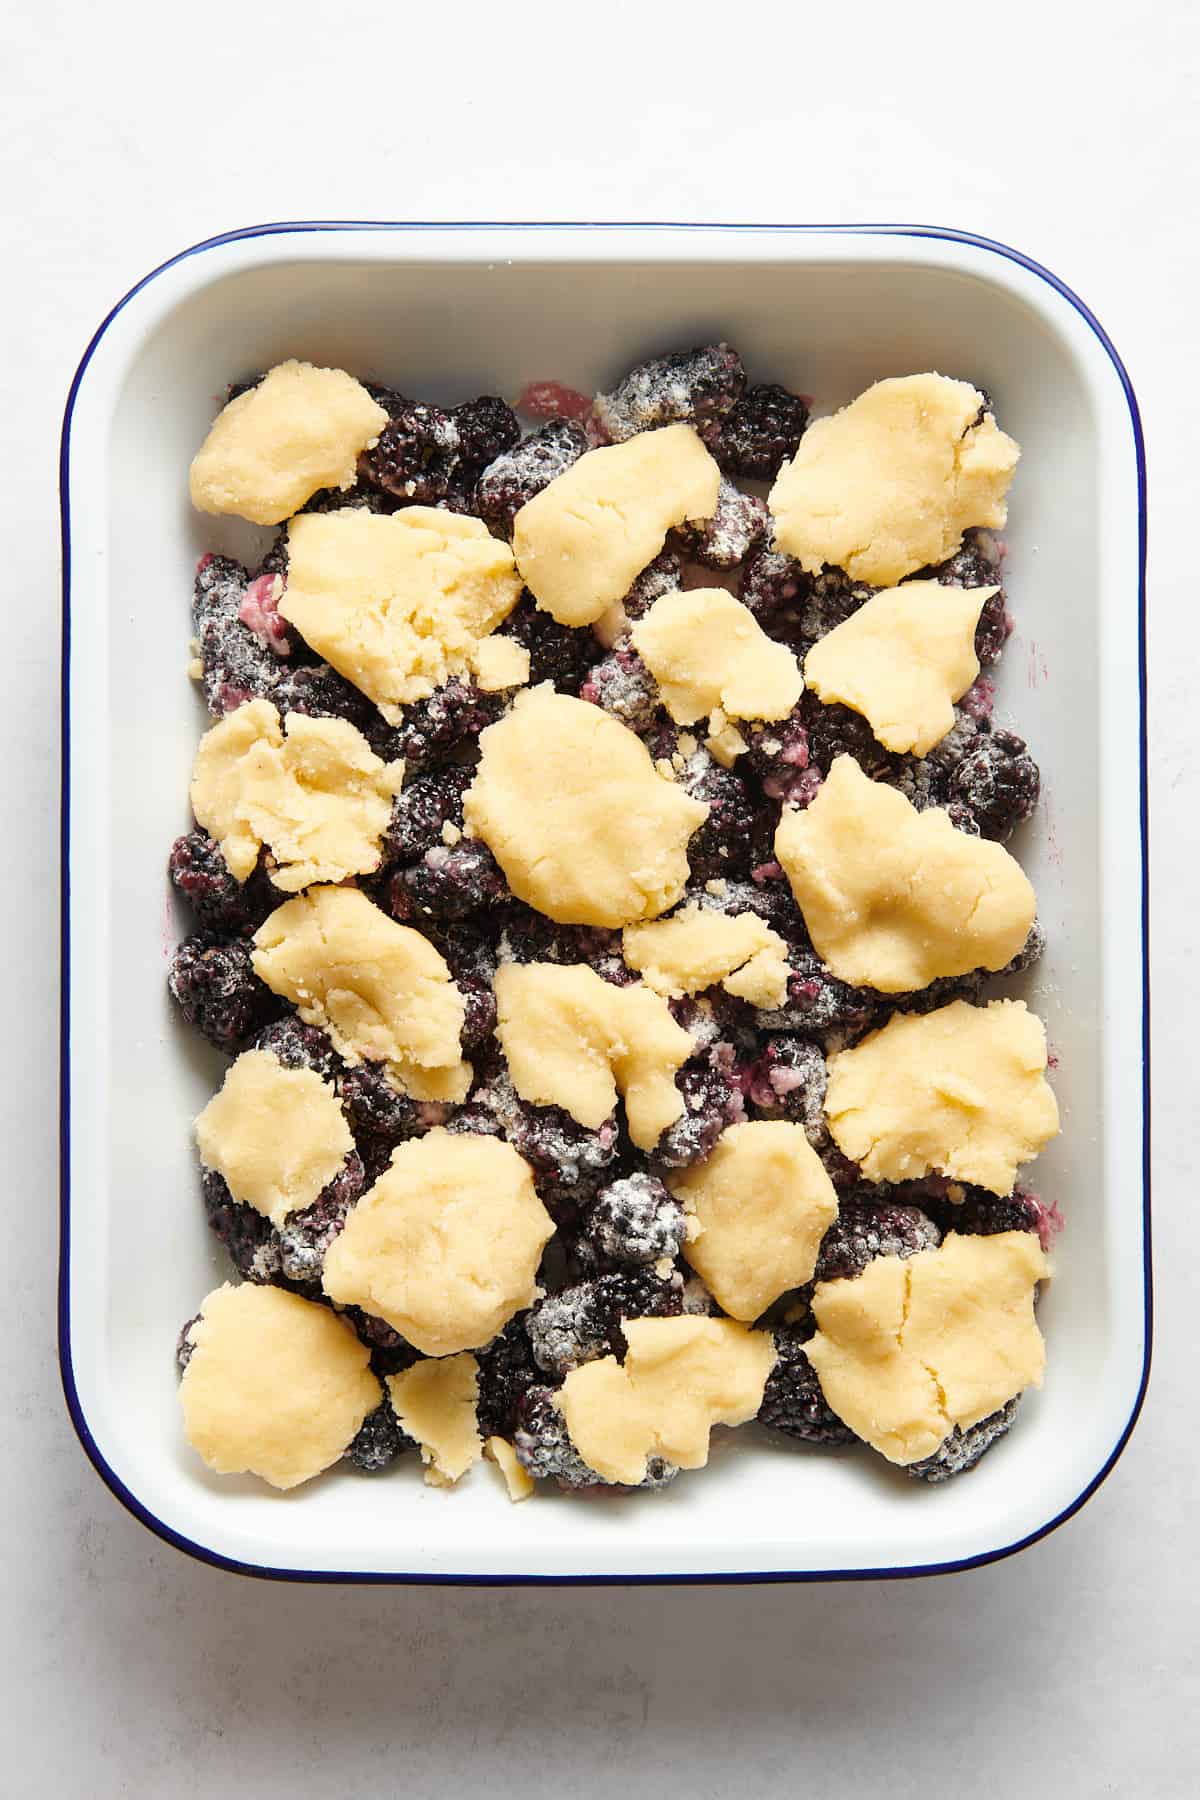 blackberry cobbler prepared in a 9x13 pan and ready to bake